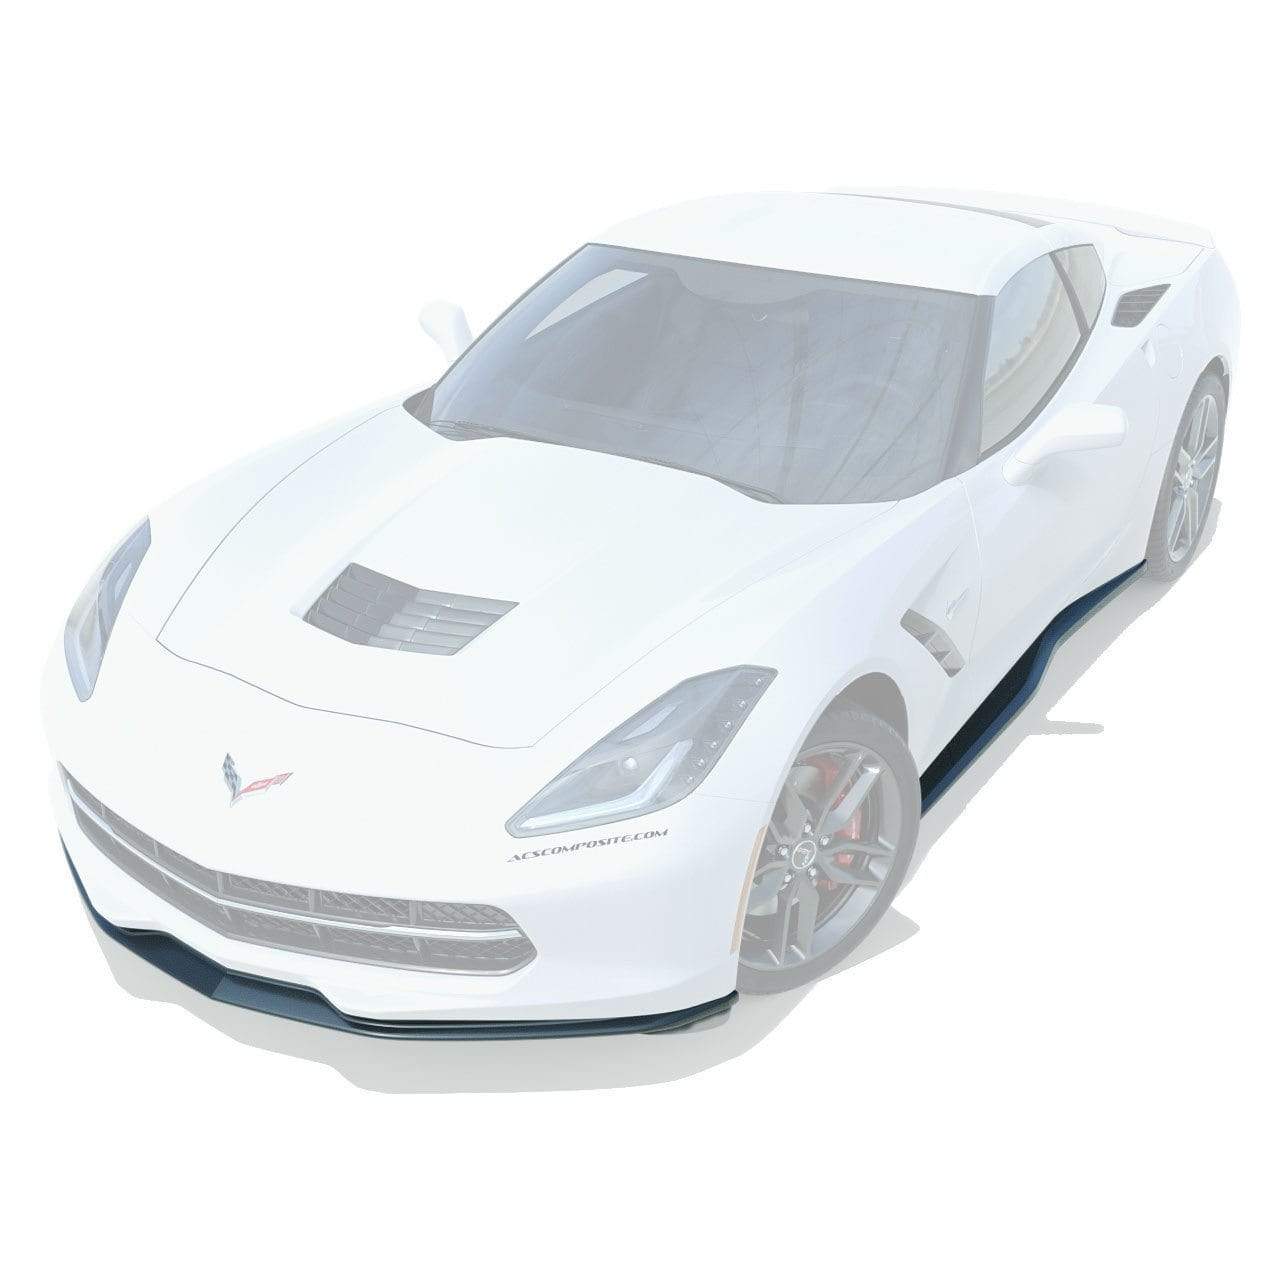 Z06 Stage 1 Splitter and Rockers [45-4-159]CFZ for C7 Corvette Stingray, Grand Sport, and Z06. Add aerodynamic style and protection to your car.